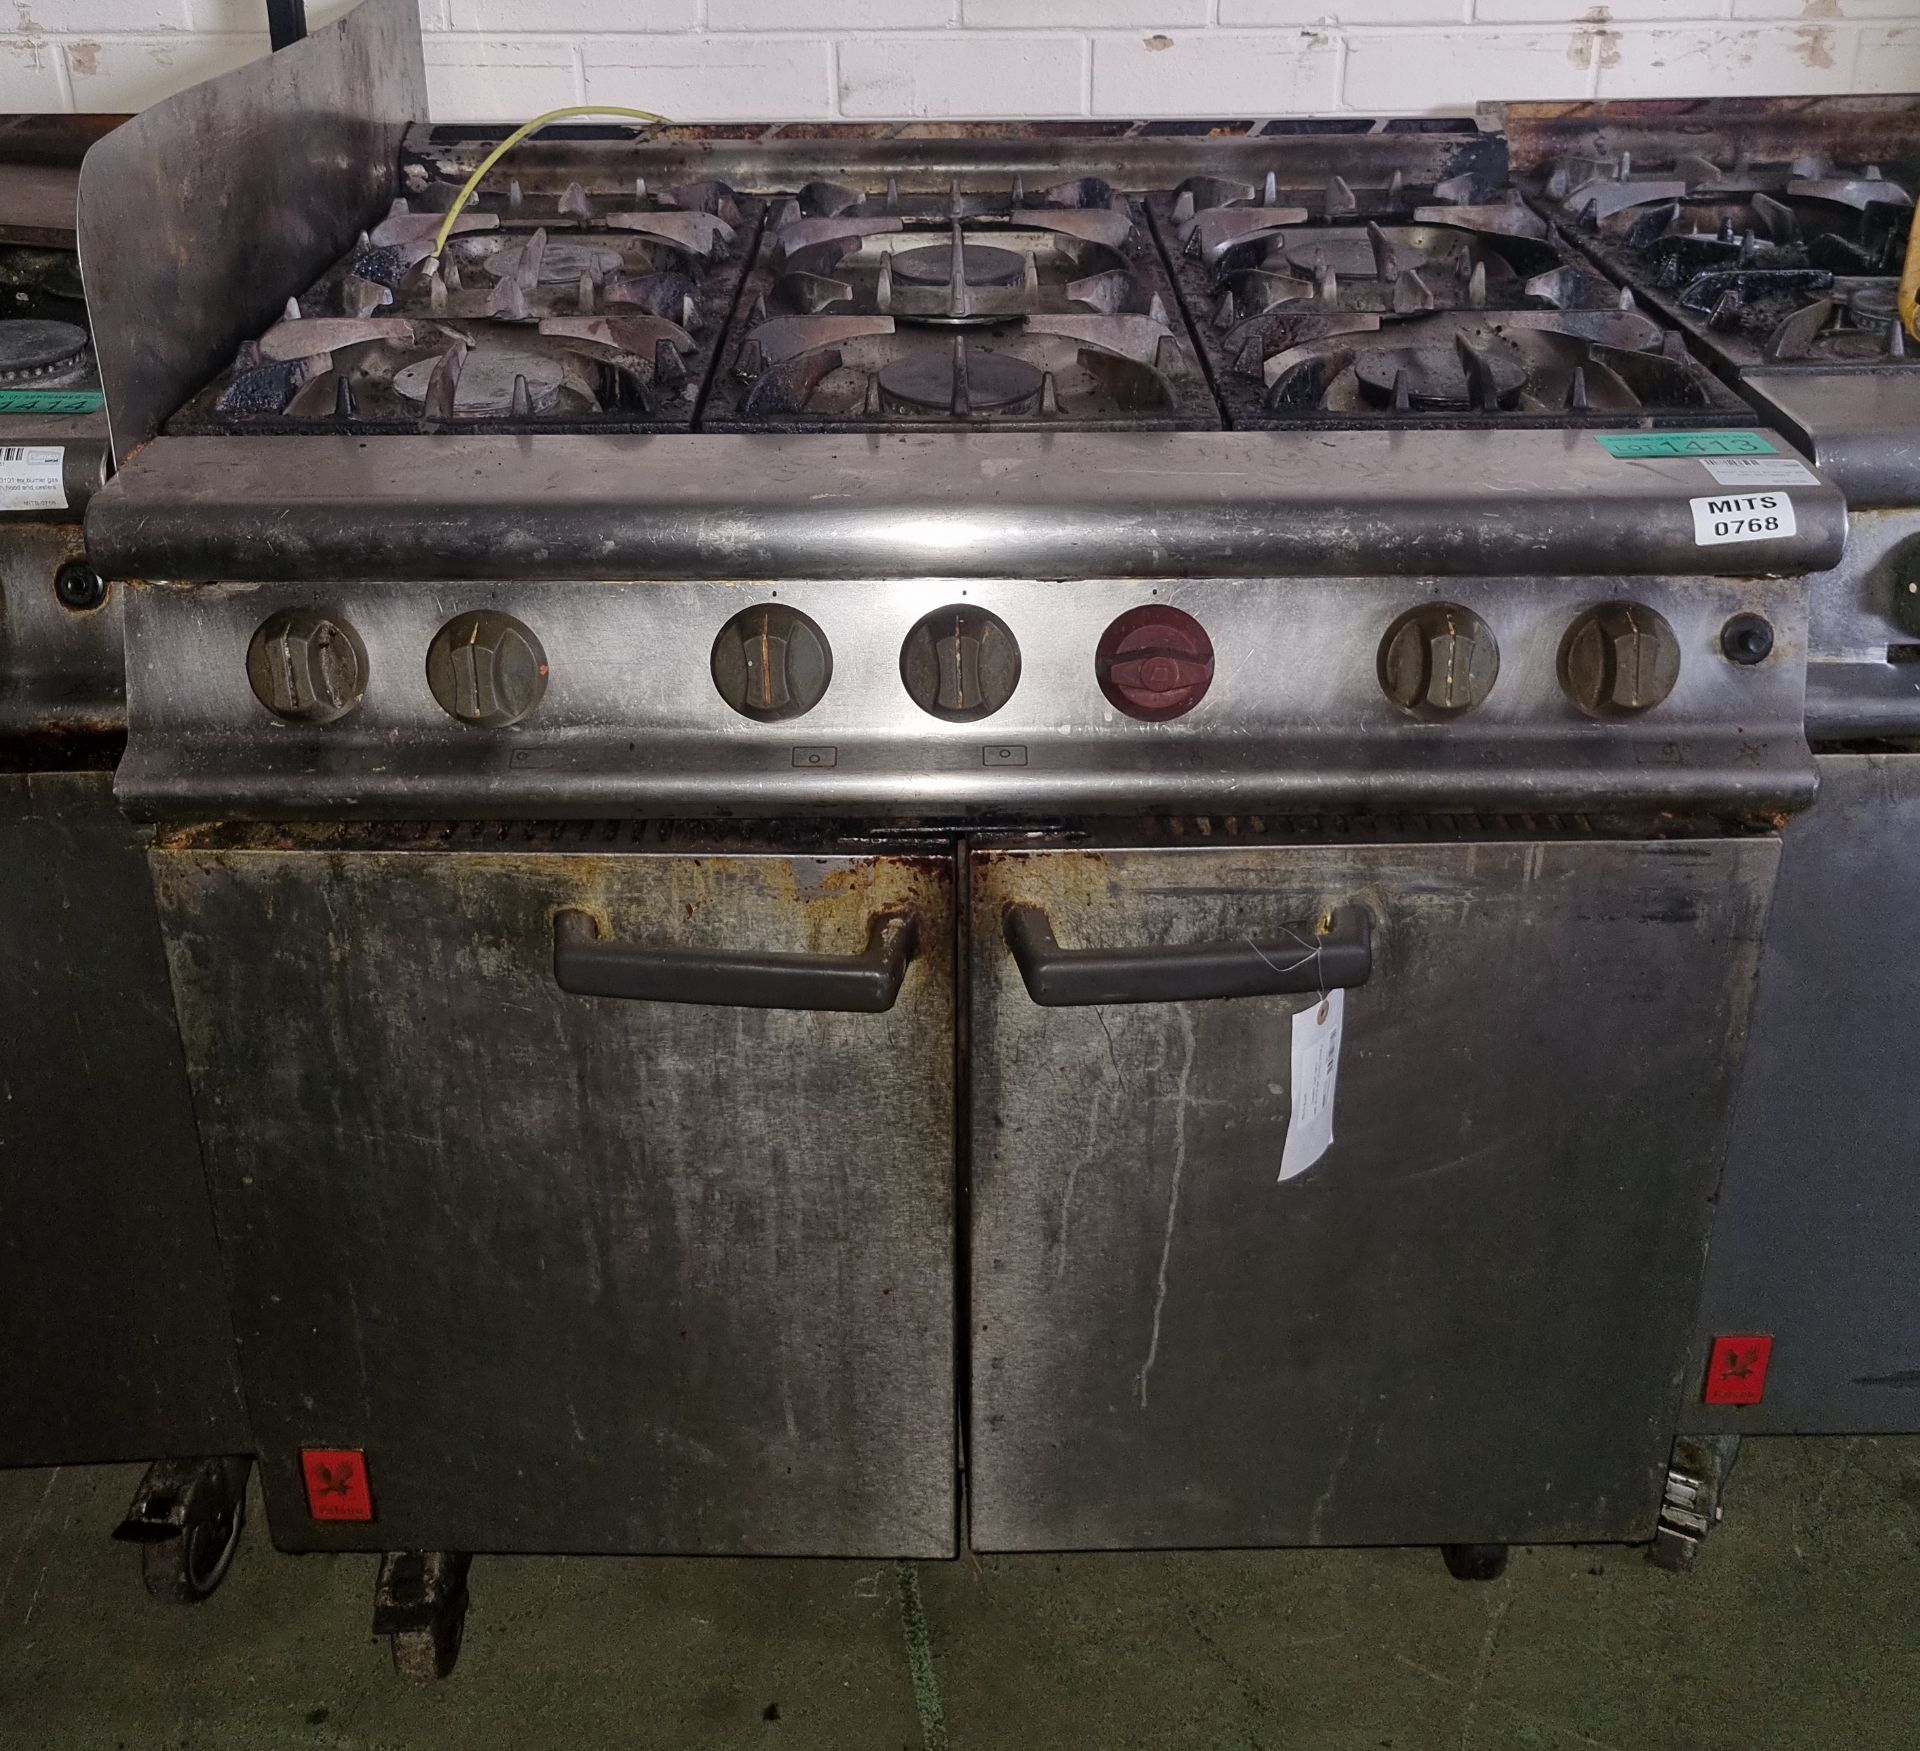 Falcon G3101 six burner gas oven with casters